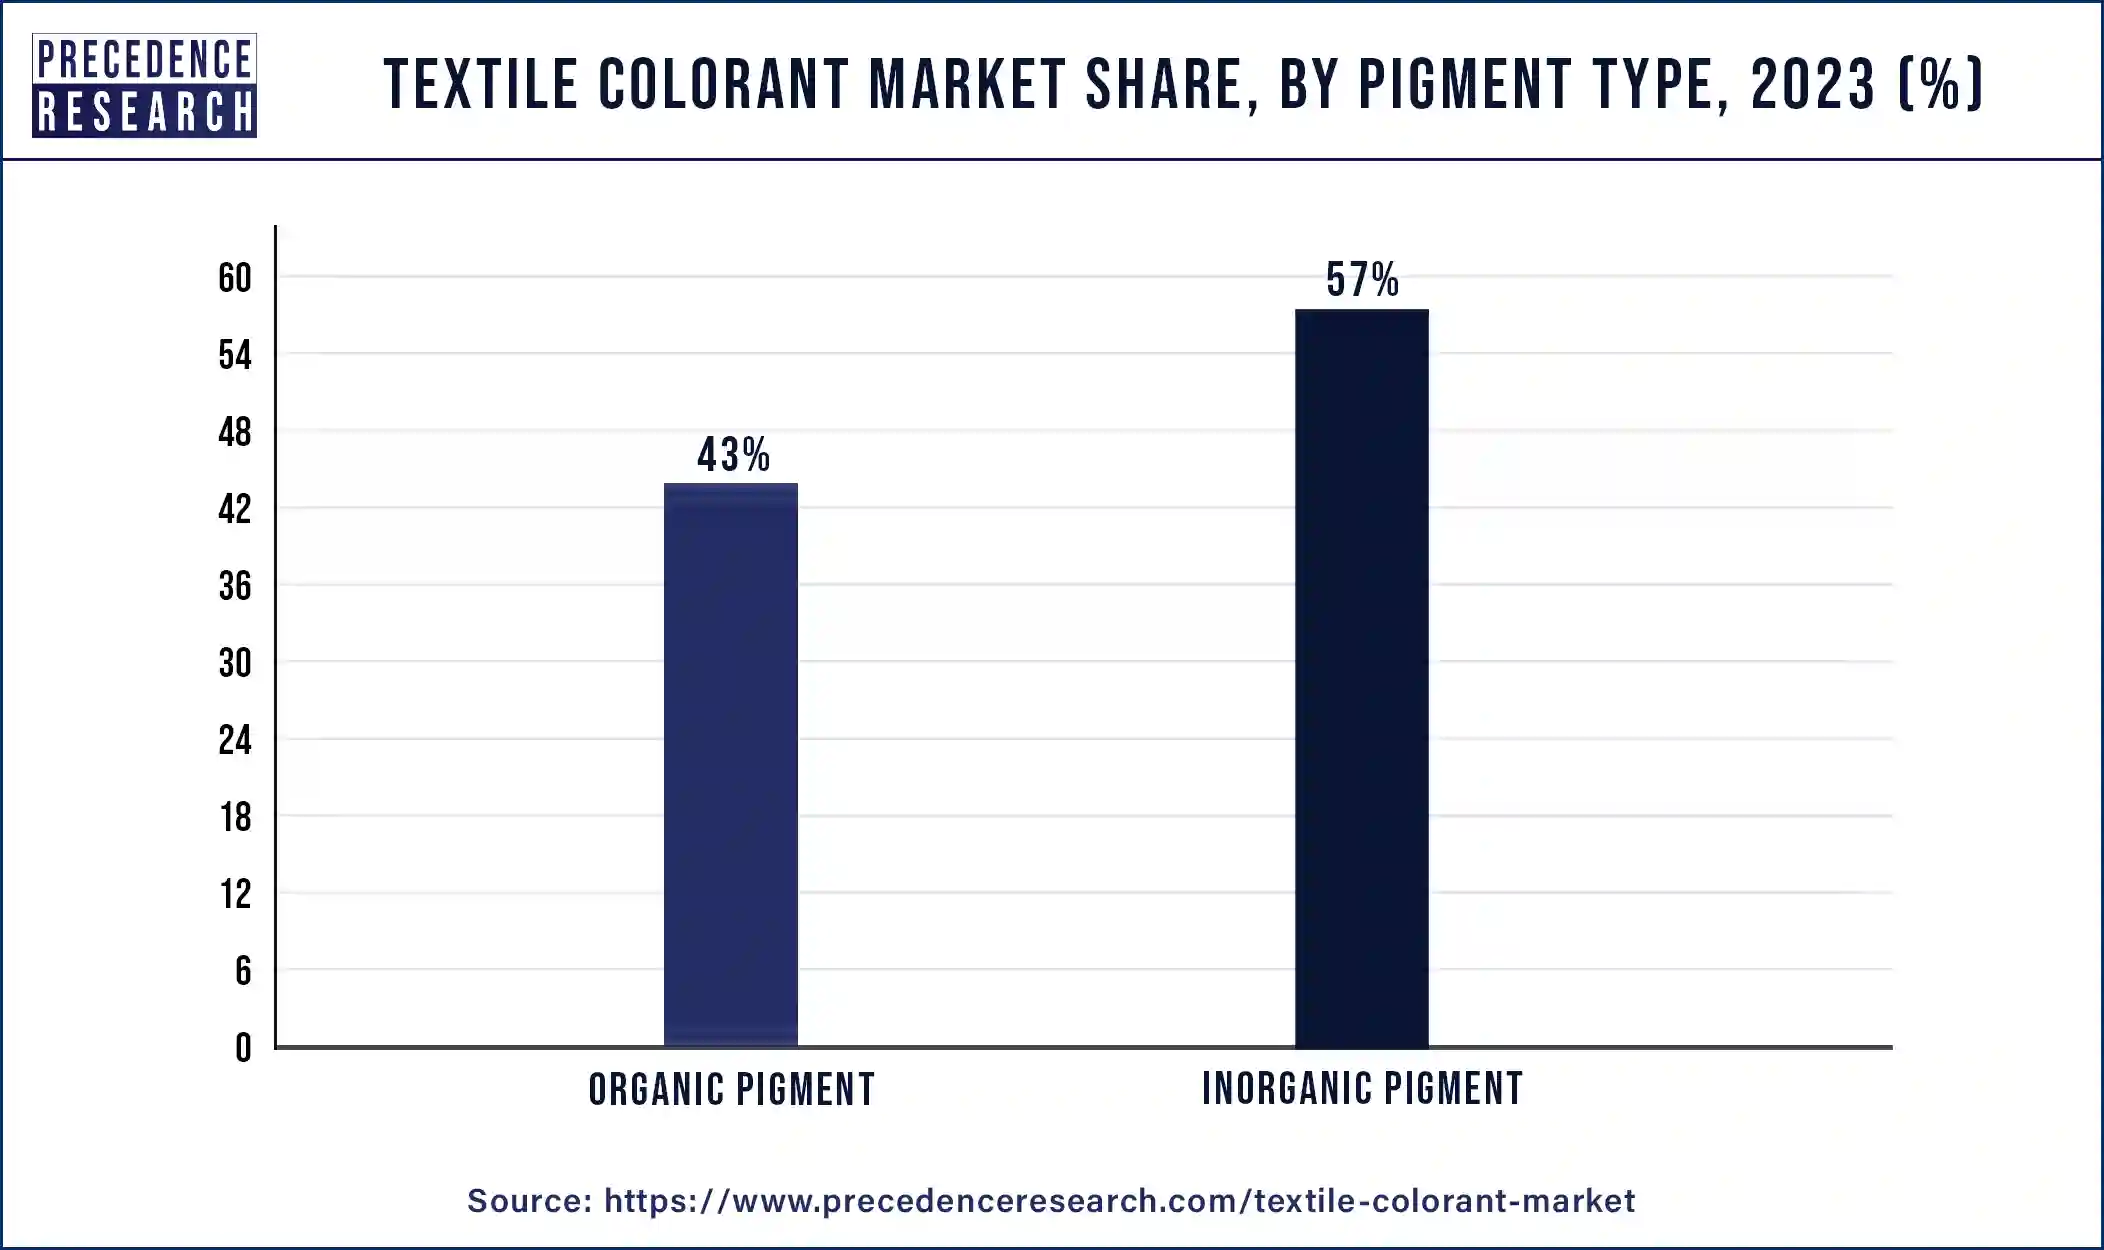 Textile Colorant Market Share, By Pigment Type, 2023 (%)